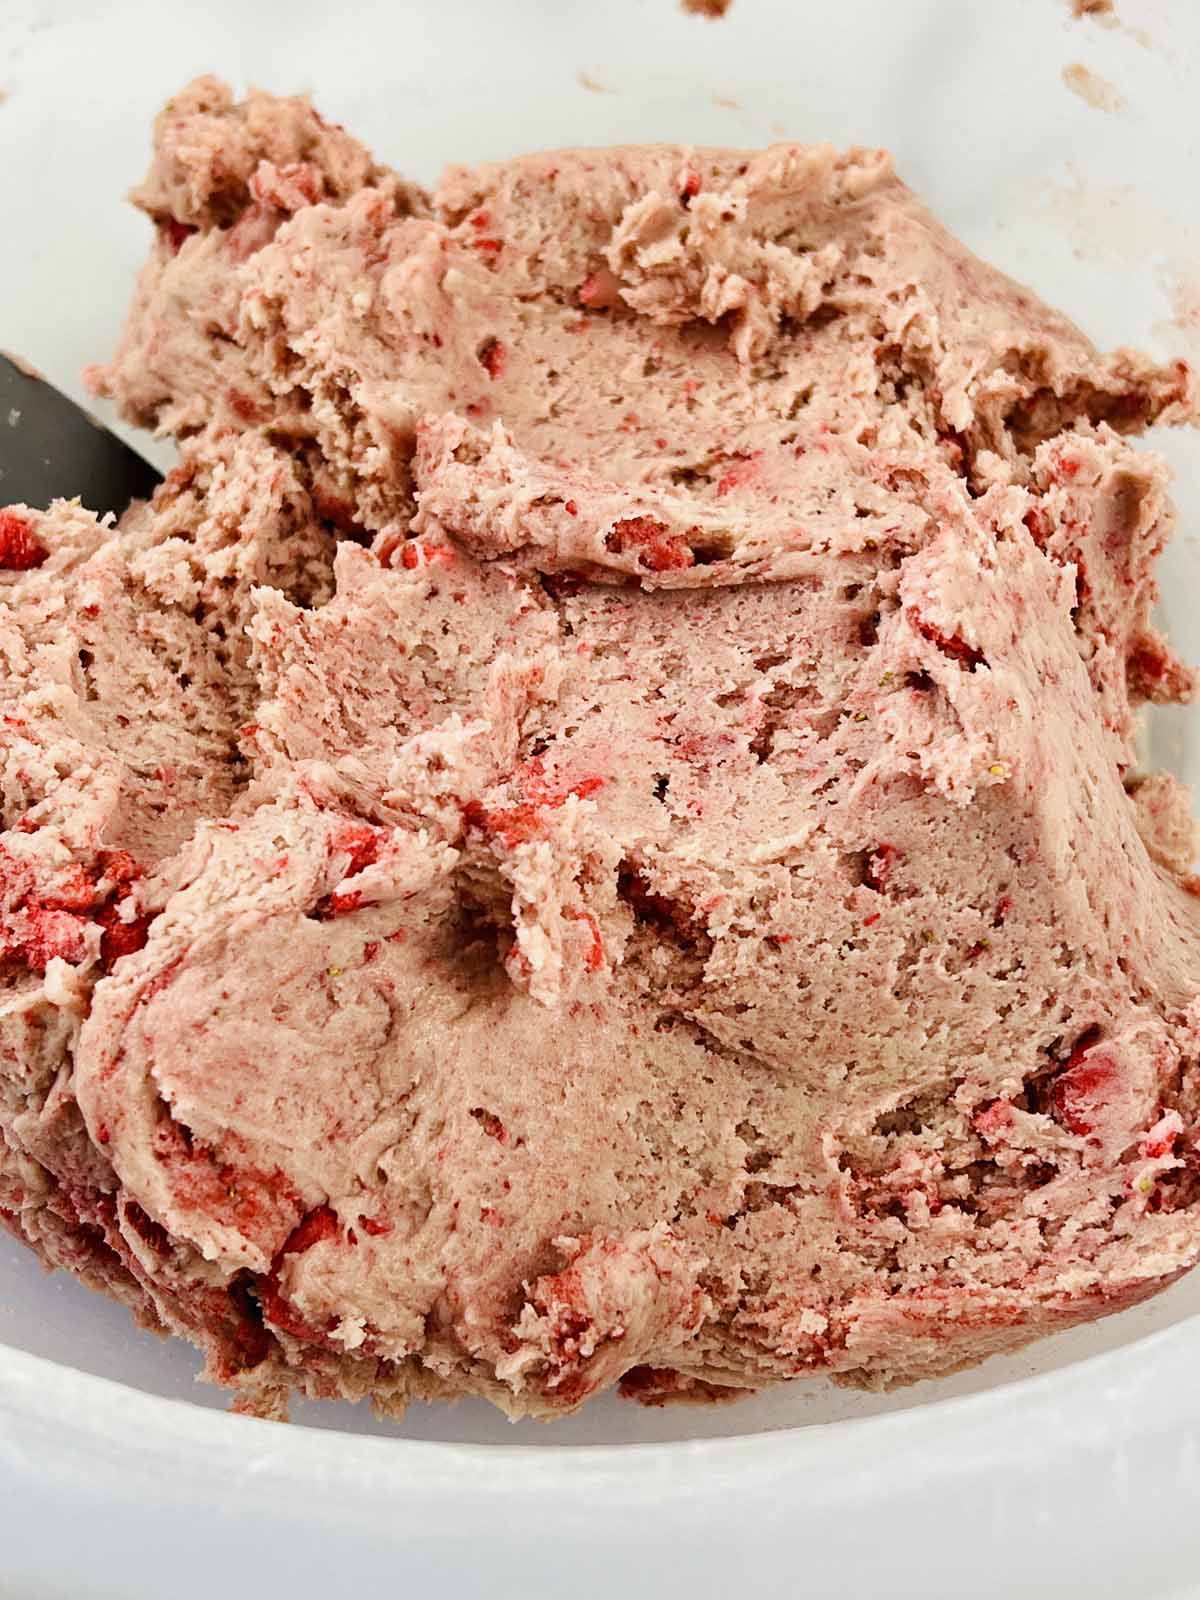 Strawberries mixed into the cookie dough.